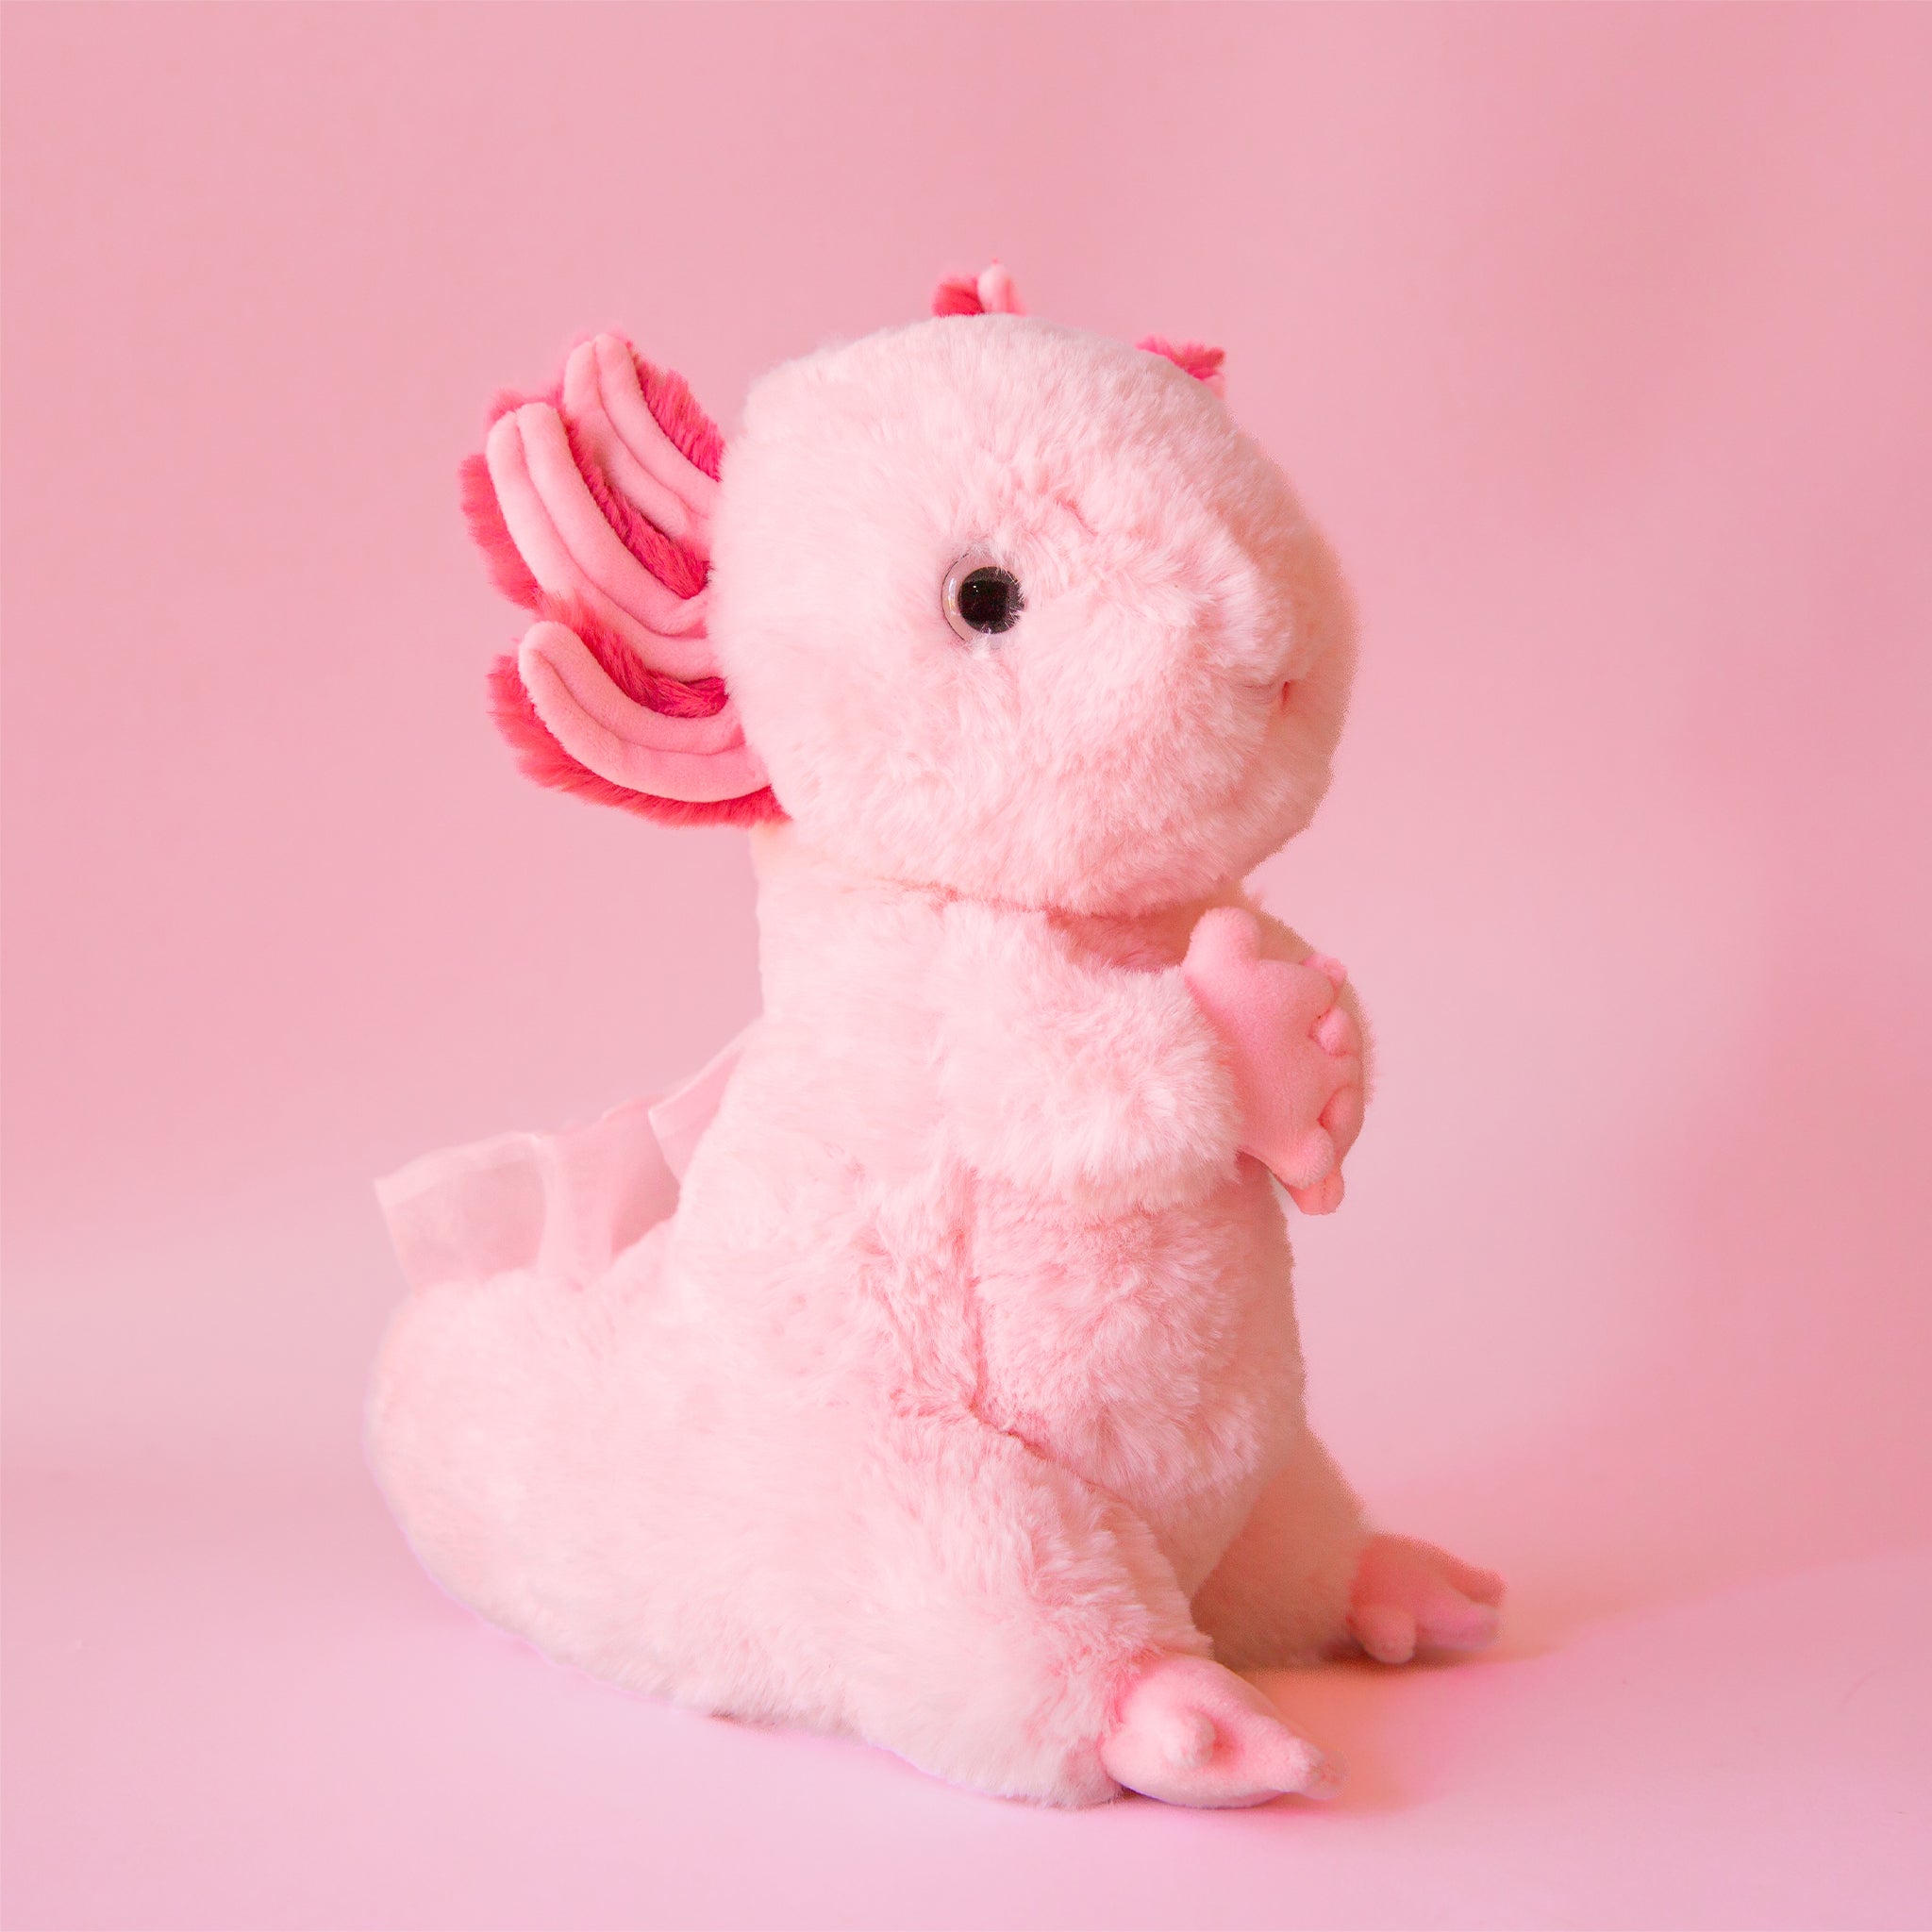 On a pink background is a light pink stuffed animal toy. 